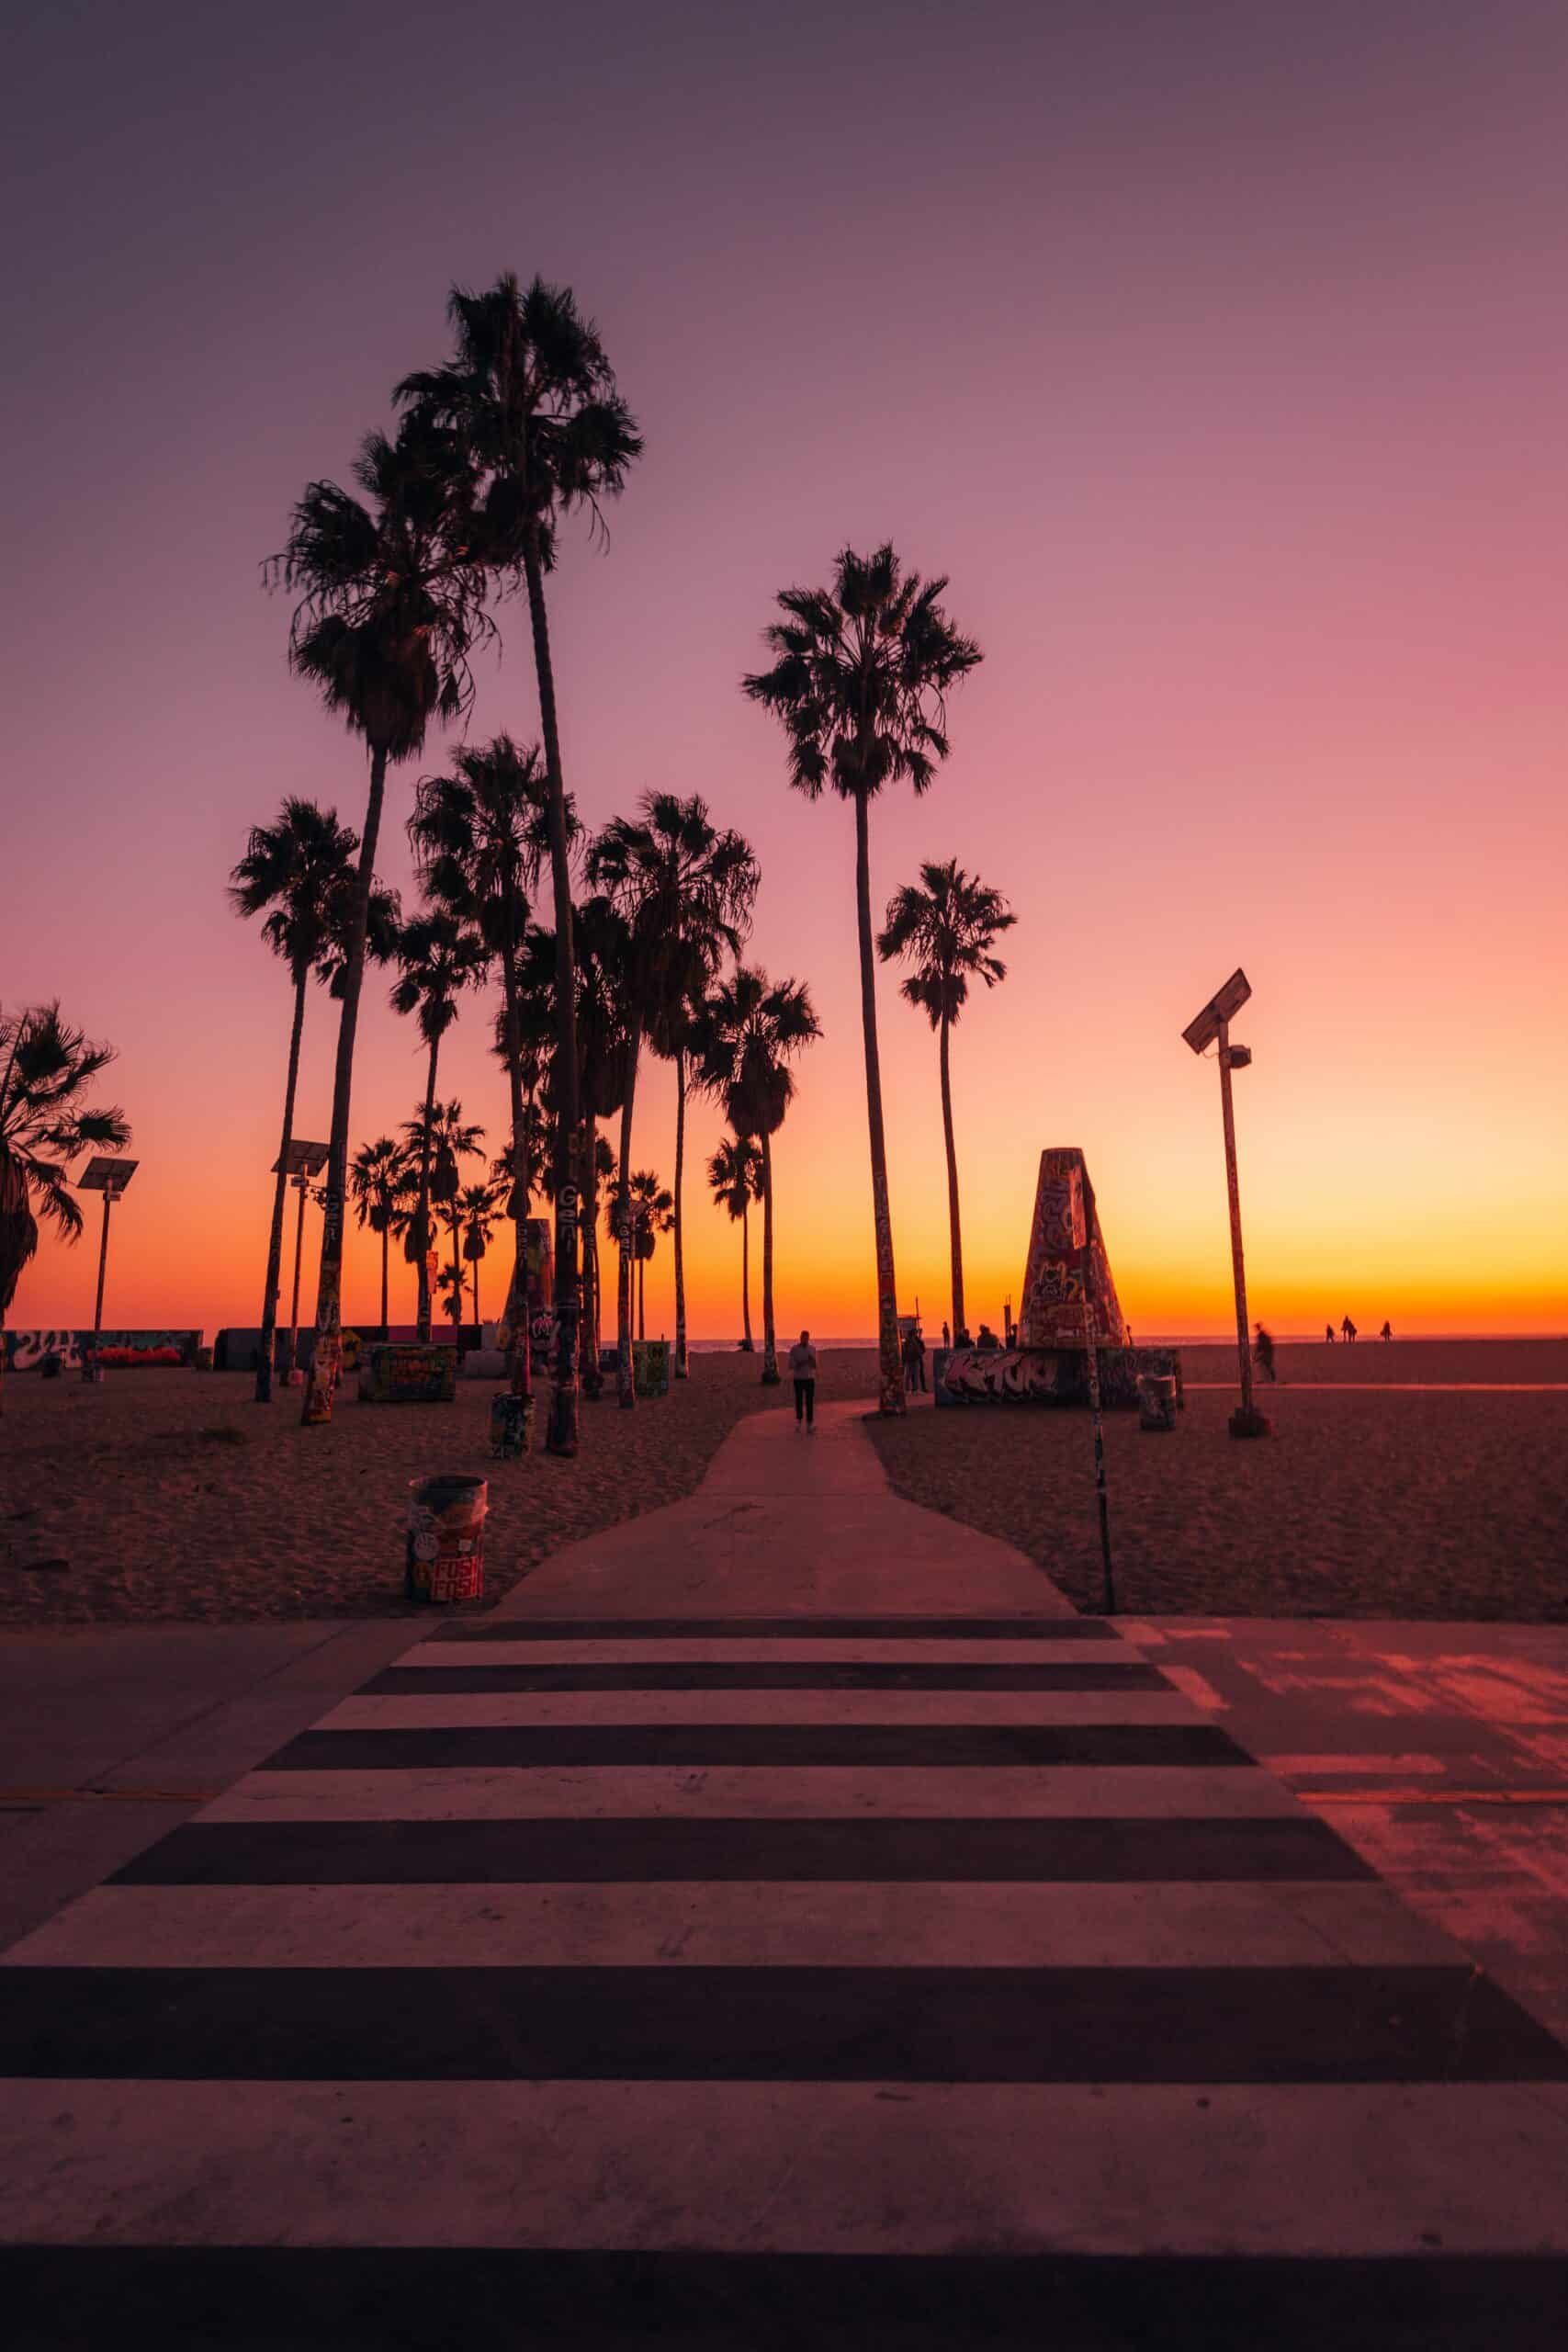 Venice Beach at sunset in Los Angeles, California